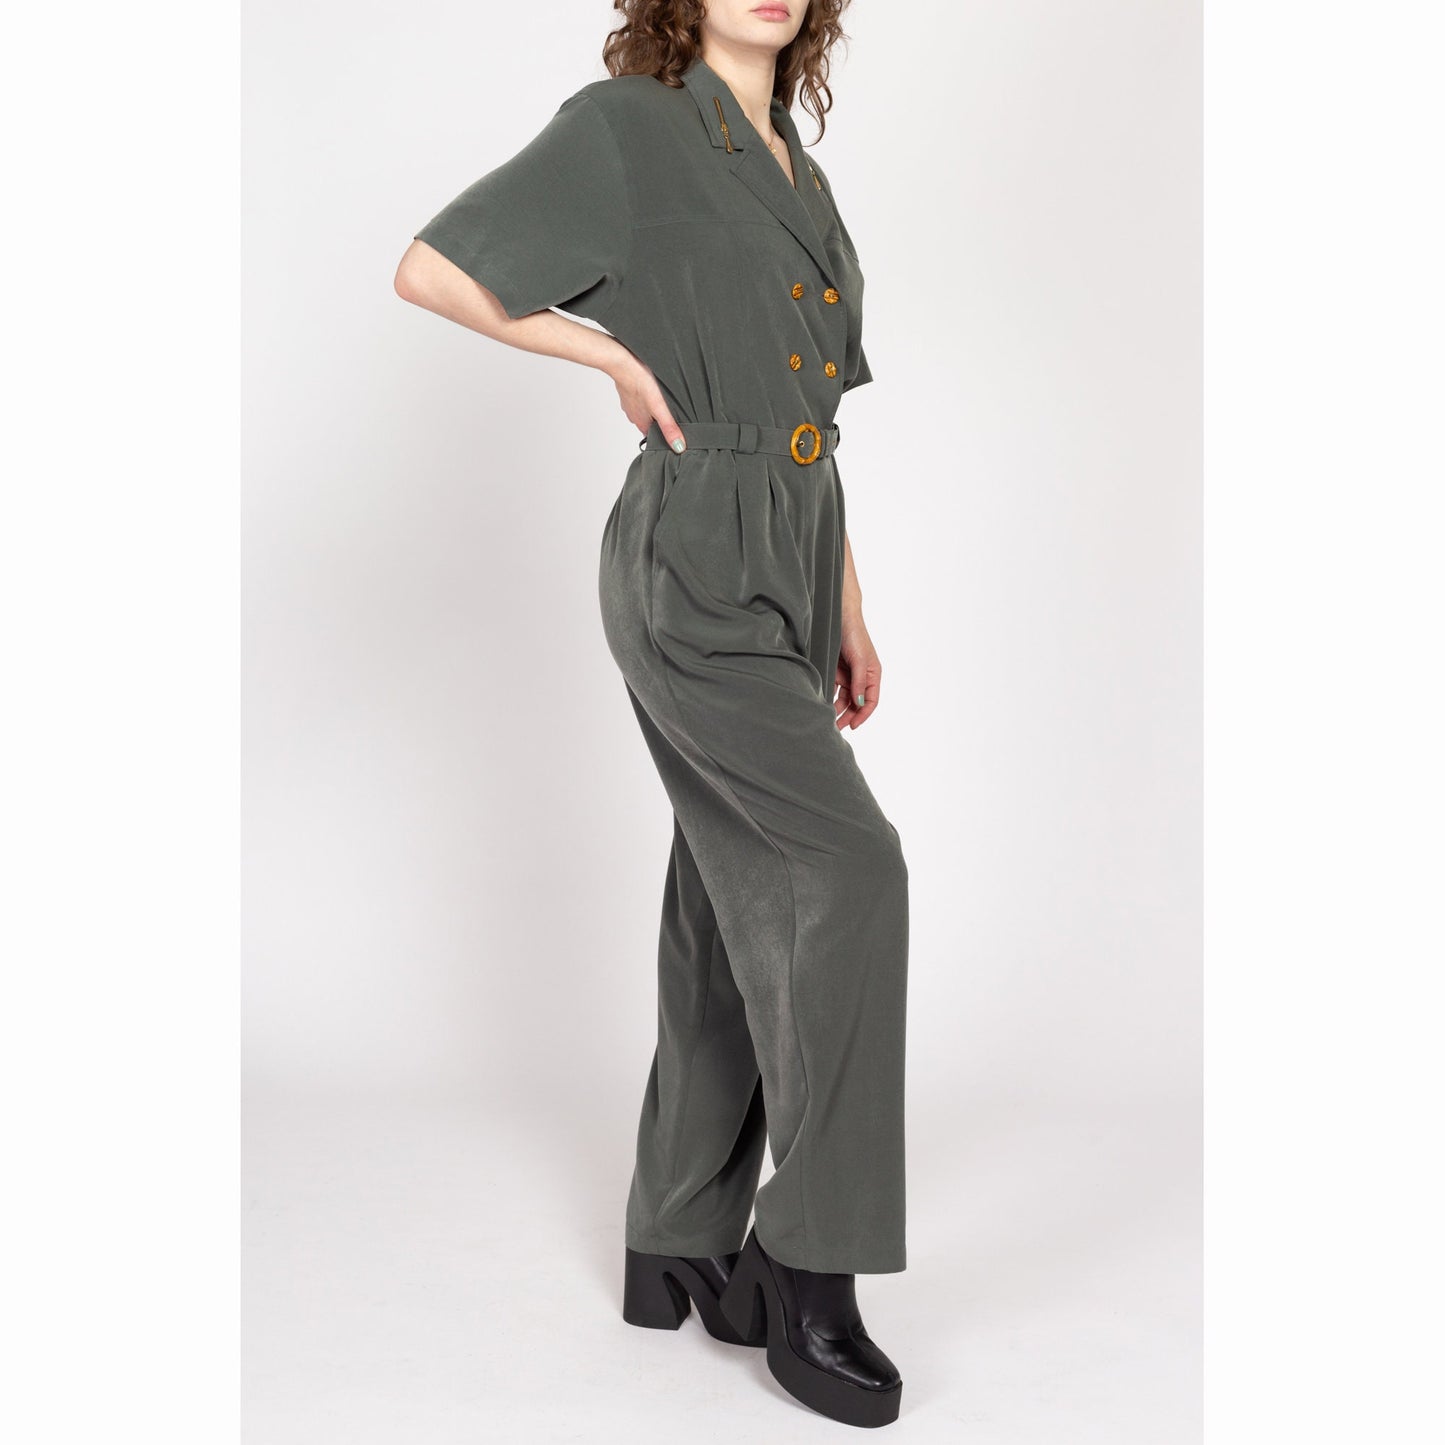 Large 90s Olive Green Double Breasted Jumpsuit | Vintage Belted Button Up Short Sleeve Collared Pantsuit